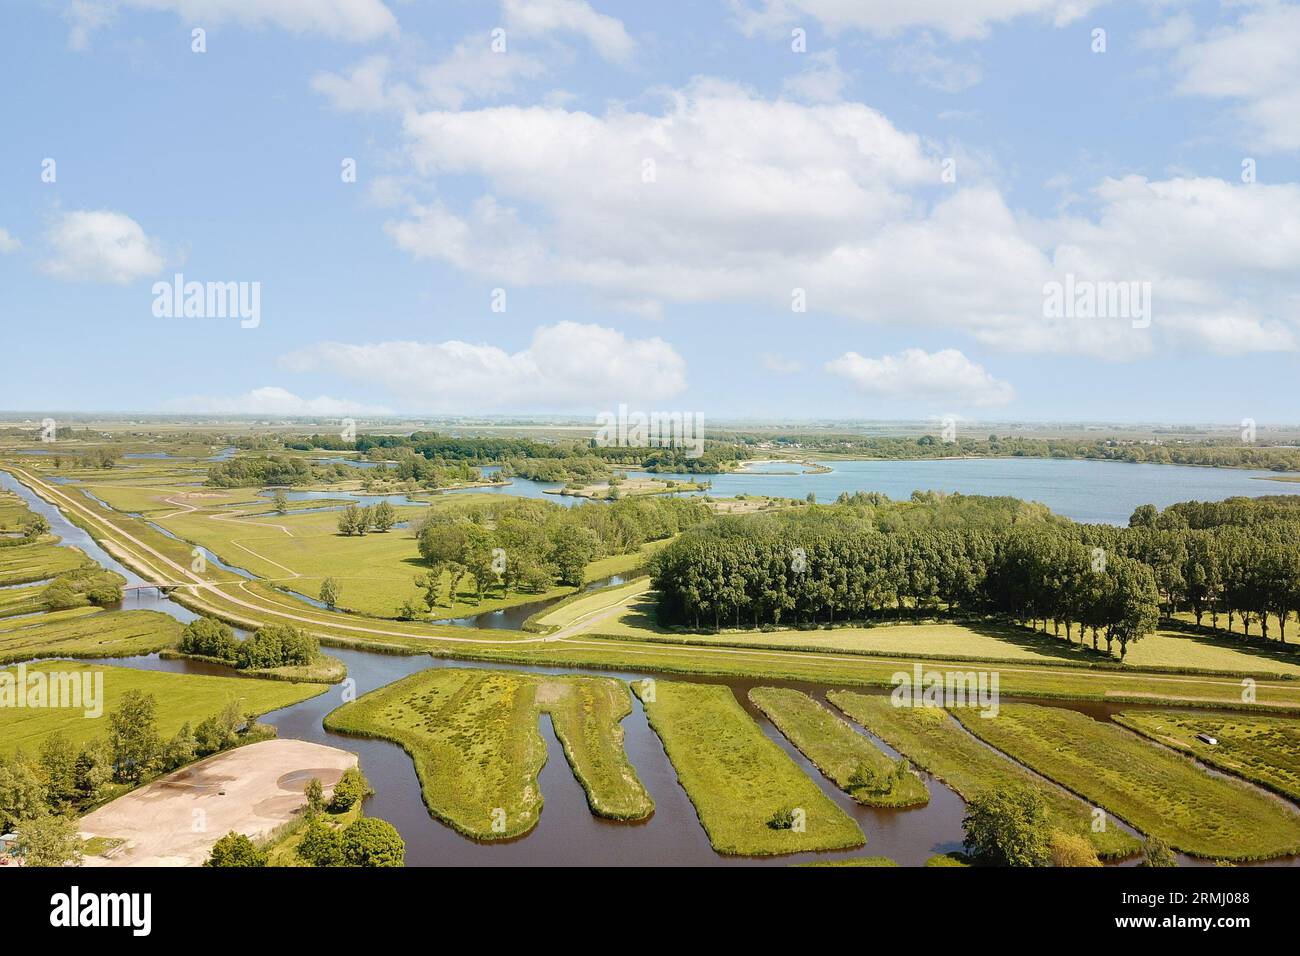 an aerial view of a lake and the land surrounding it is surrounded by trees, grass, and water with clouds in the sky is blue Stock Photo